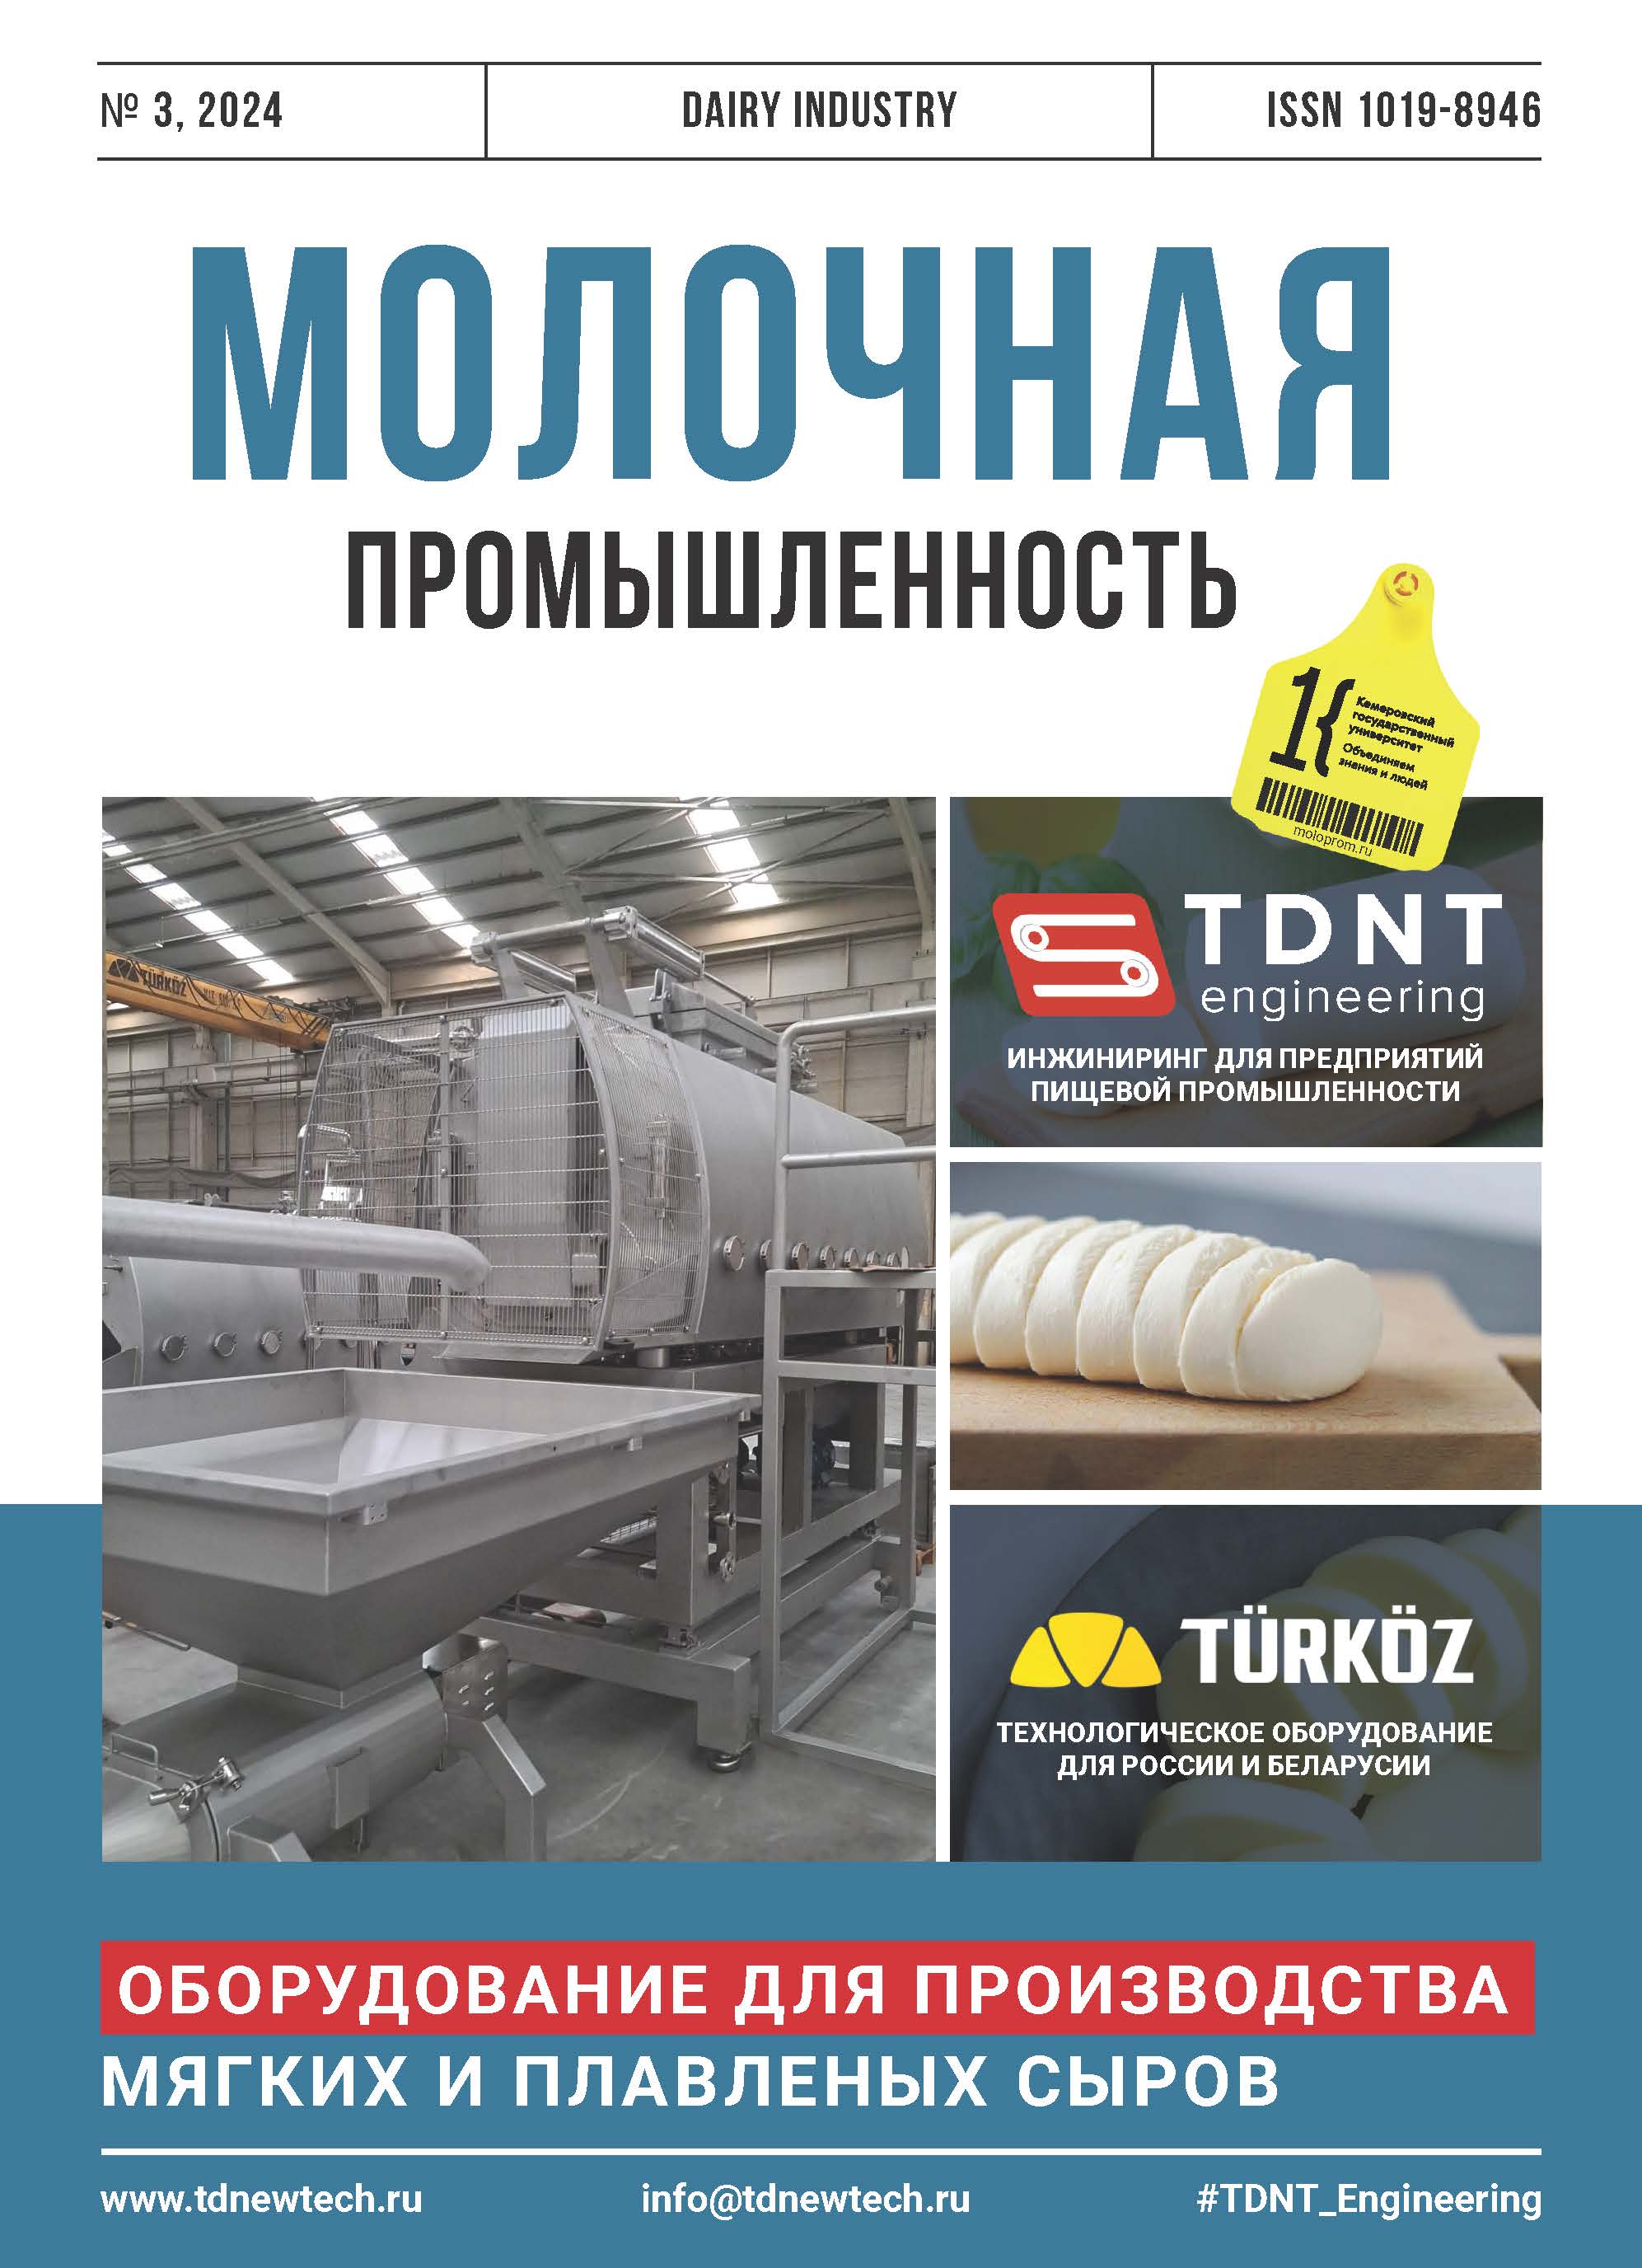                         Türköz and TDNT Engineering: Solutions for White Cheese Production
            